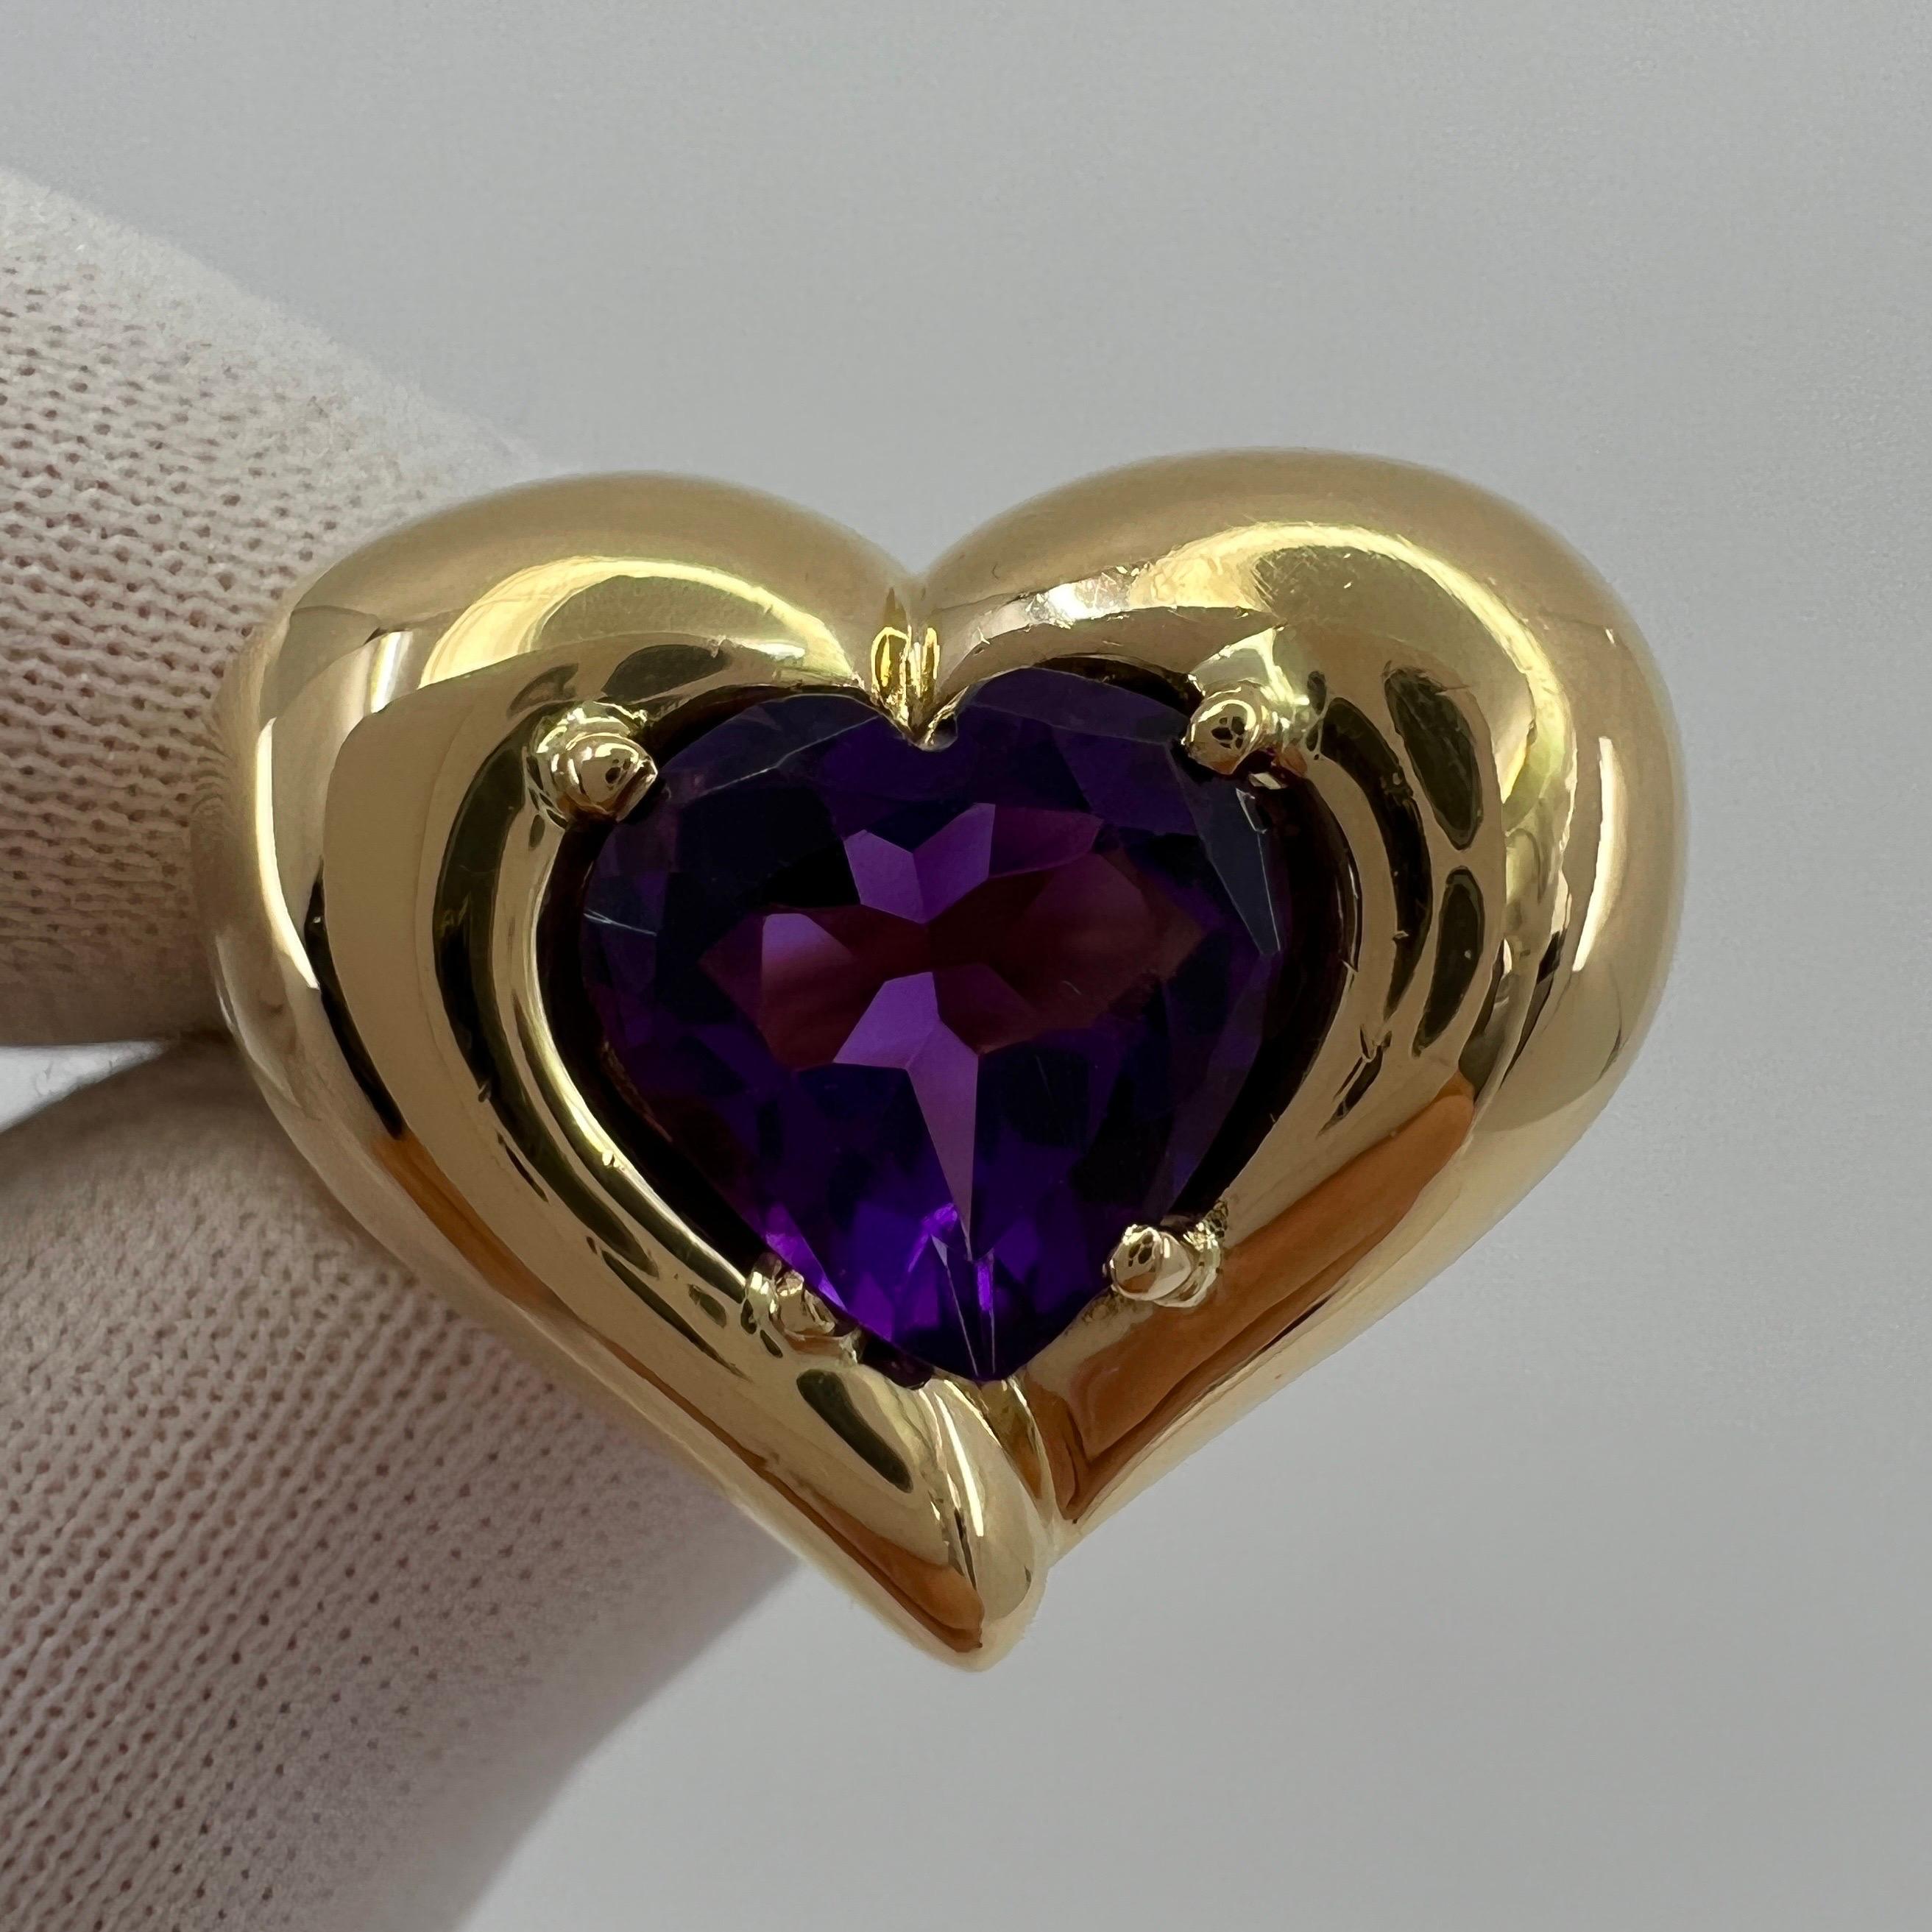 Rare Vintage Van Cleef & Arpels 18k Yellow Gold Amethyst Heart Ring with Box 3